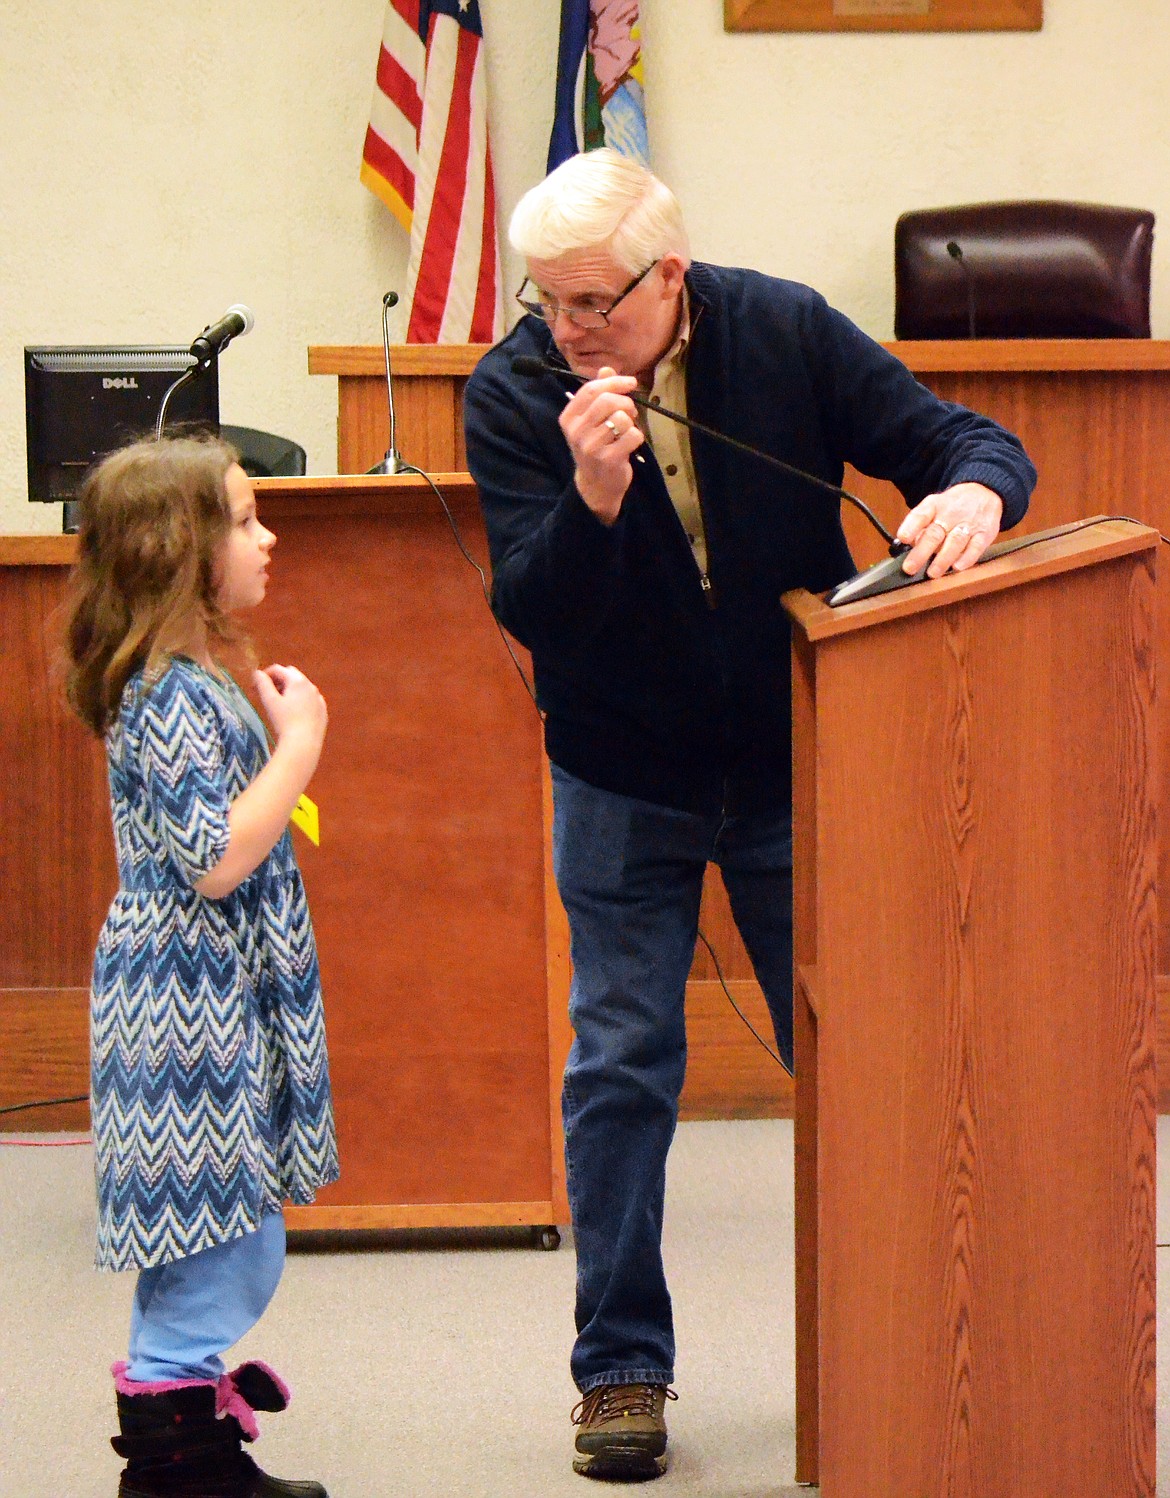 Young Sabrina McGaughey of Thompson Falls gets some help from Dan Whittenburg as he adjust the microphone for her. (Erin Jusseaume/ Clark Fork Valley Press)